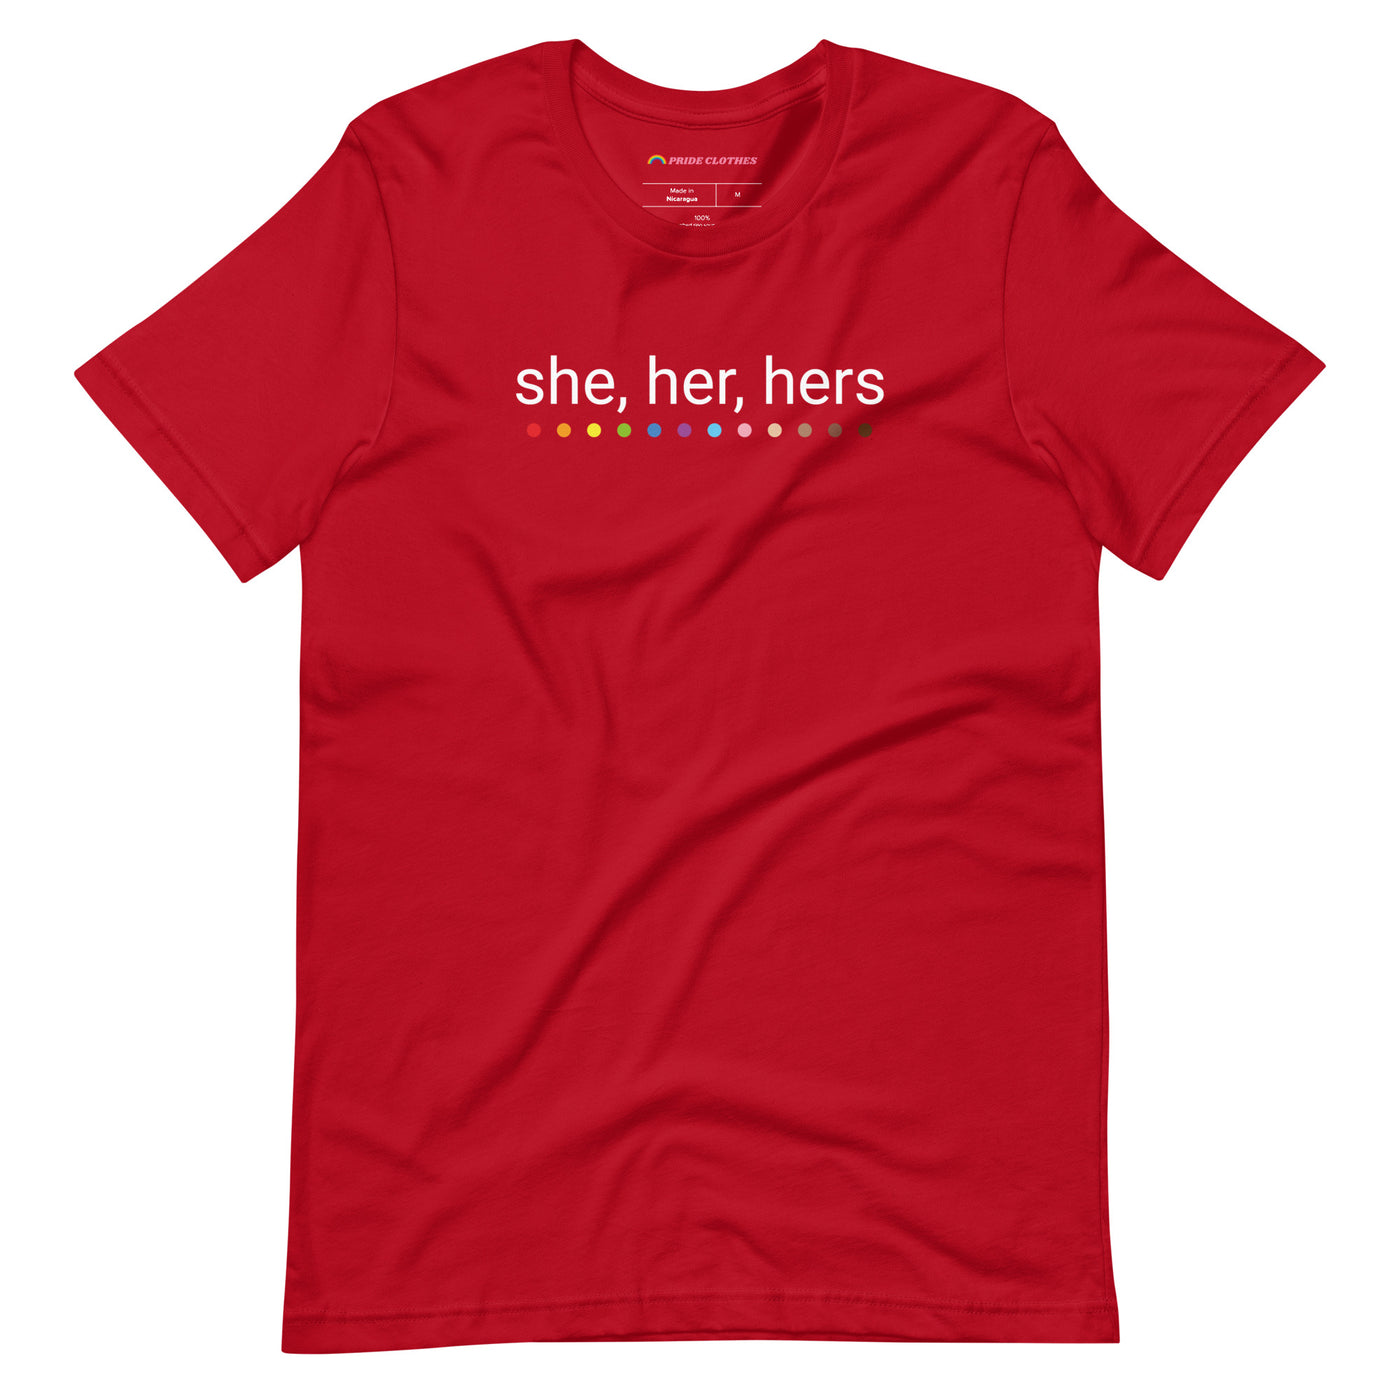 Pride Clothes - She Her Hers These Are My Pronouns T-Shirt - Red